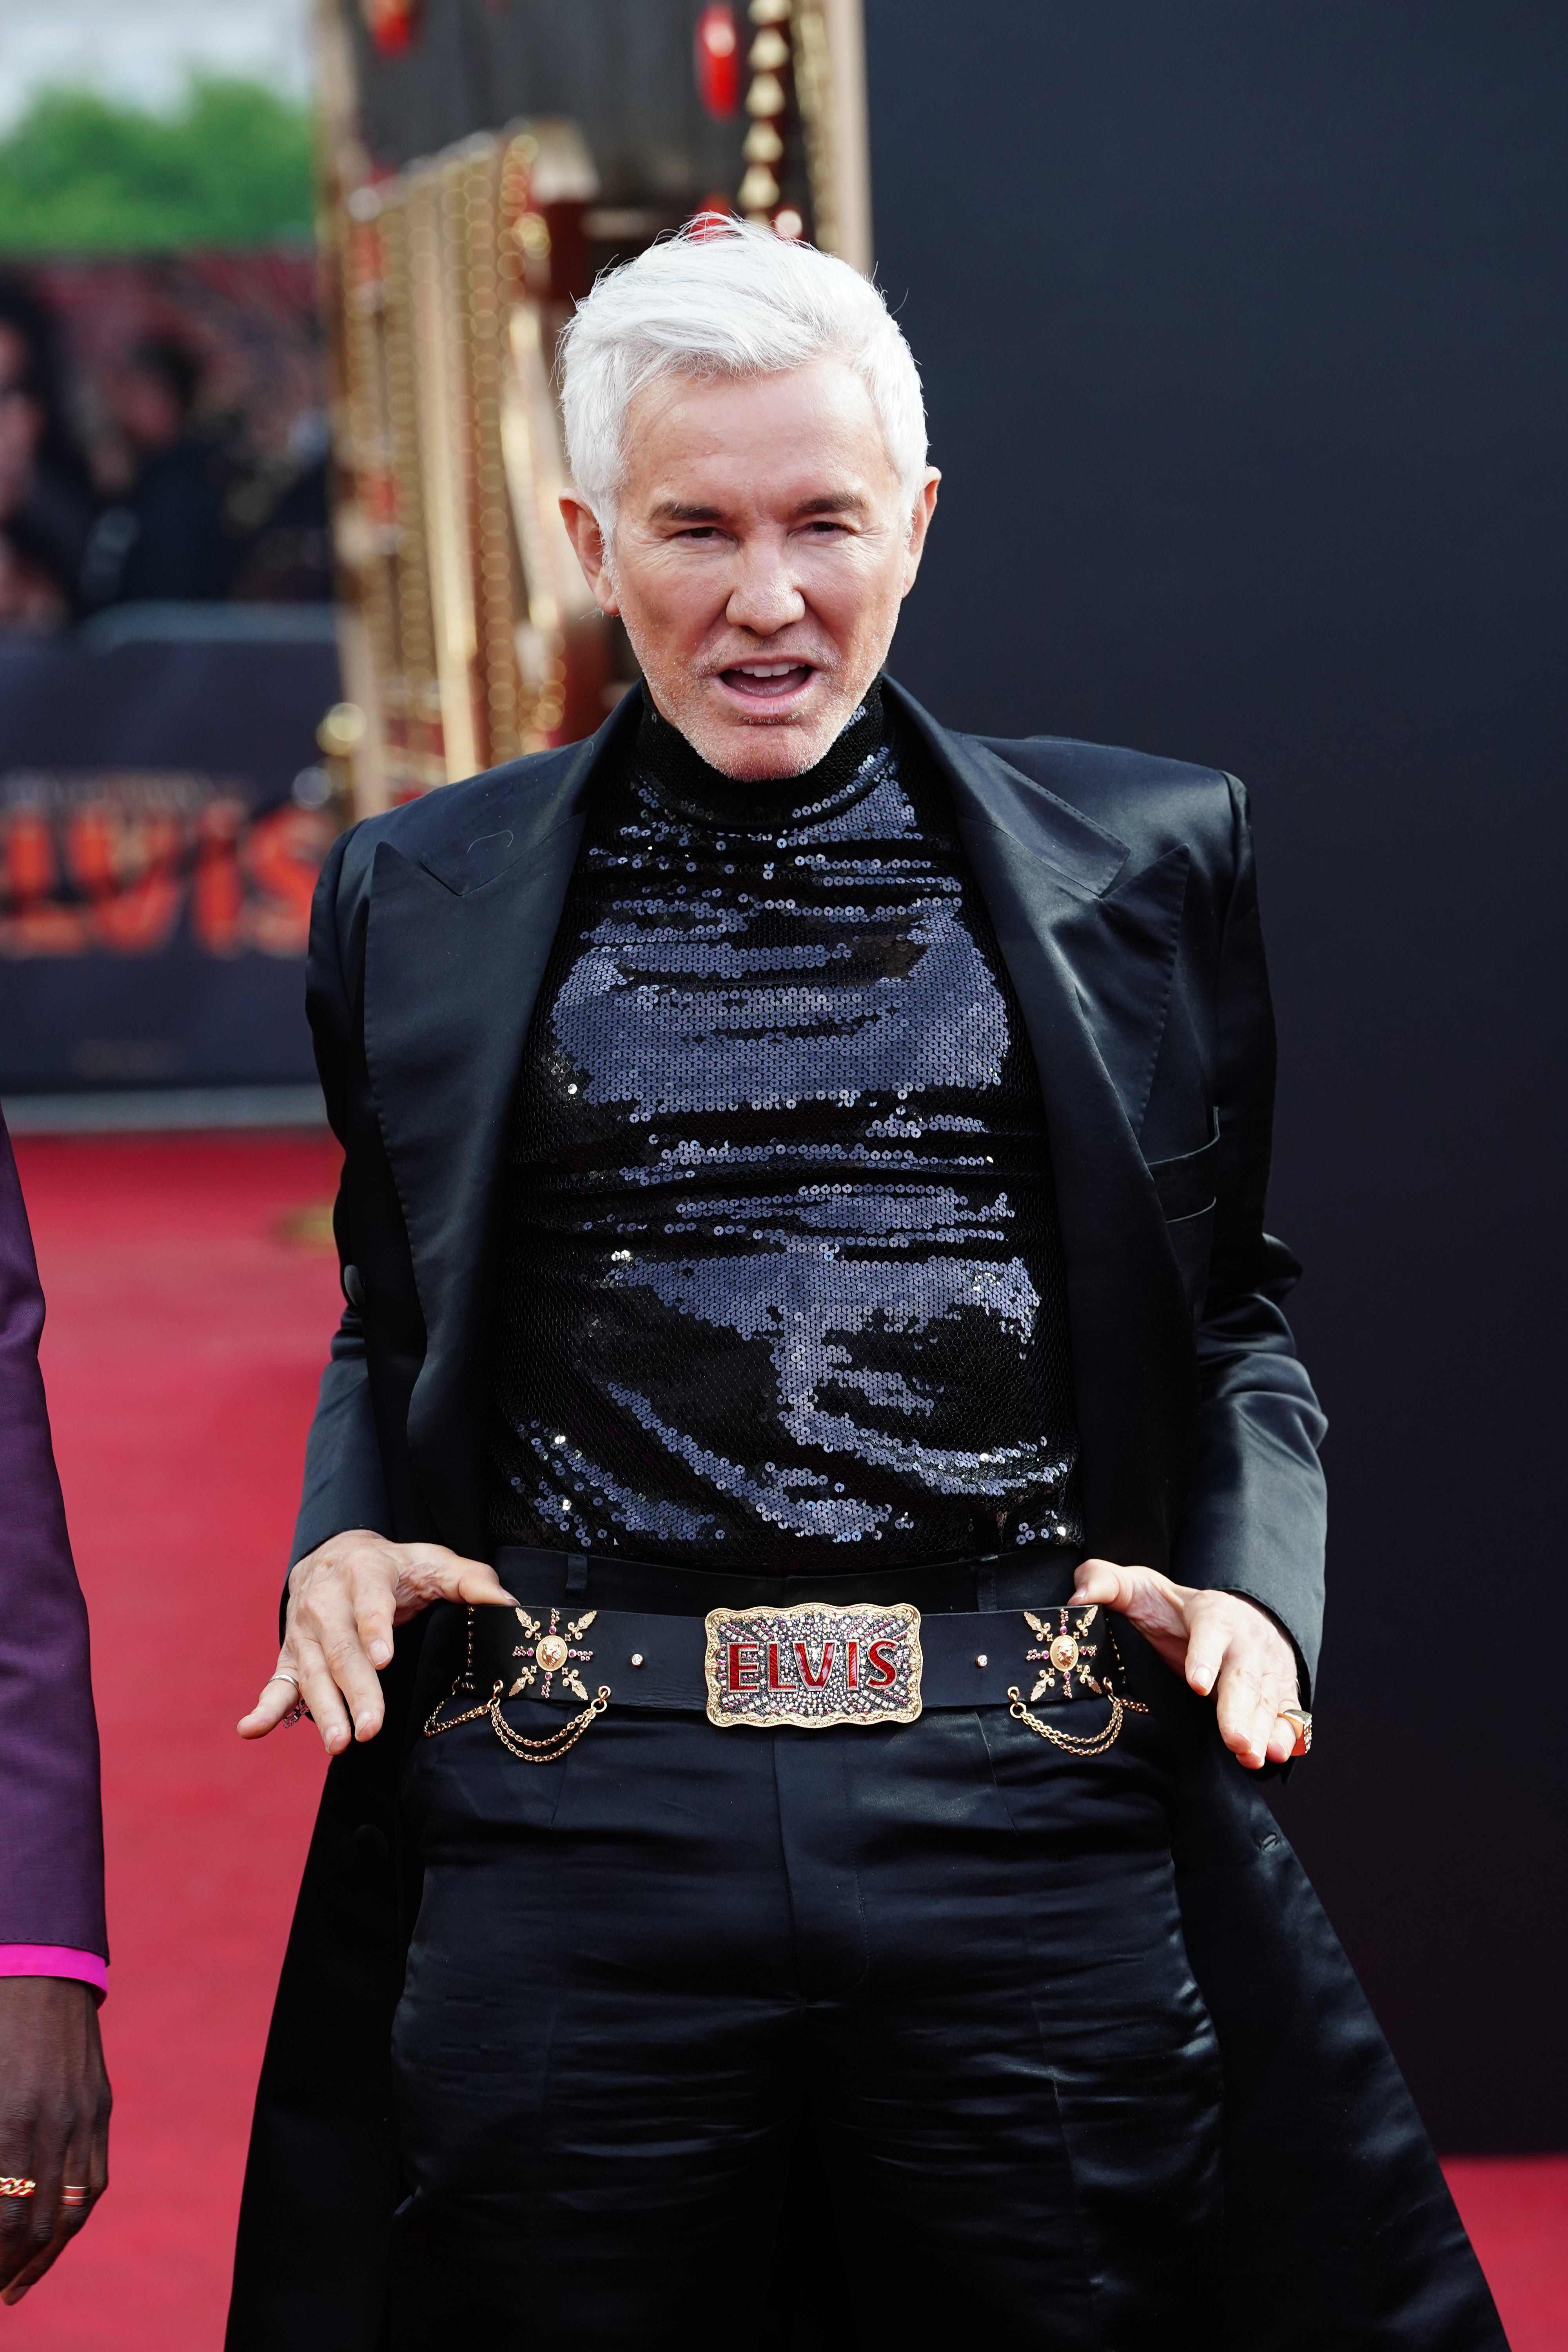 Butler described Luhrmann as ‘one of the most incredible people on this planet’ (Ian West/PA)